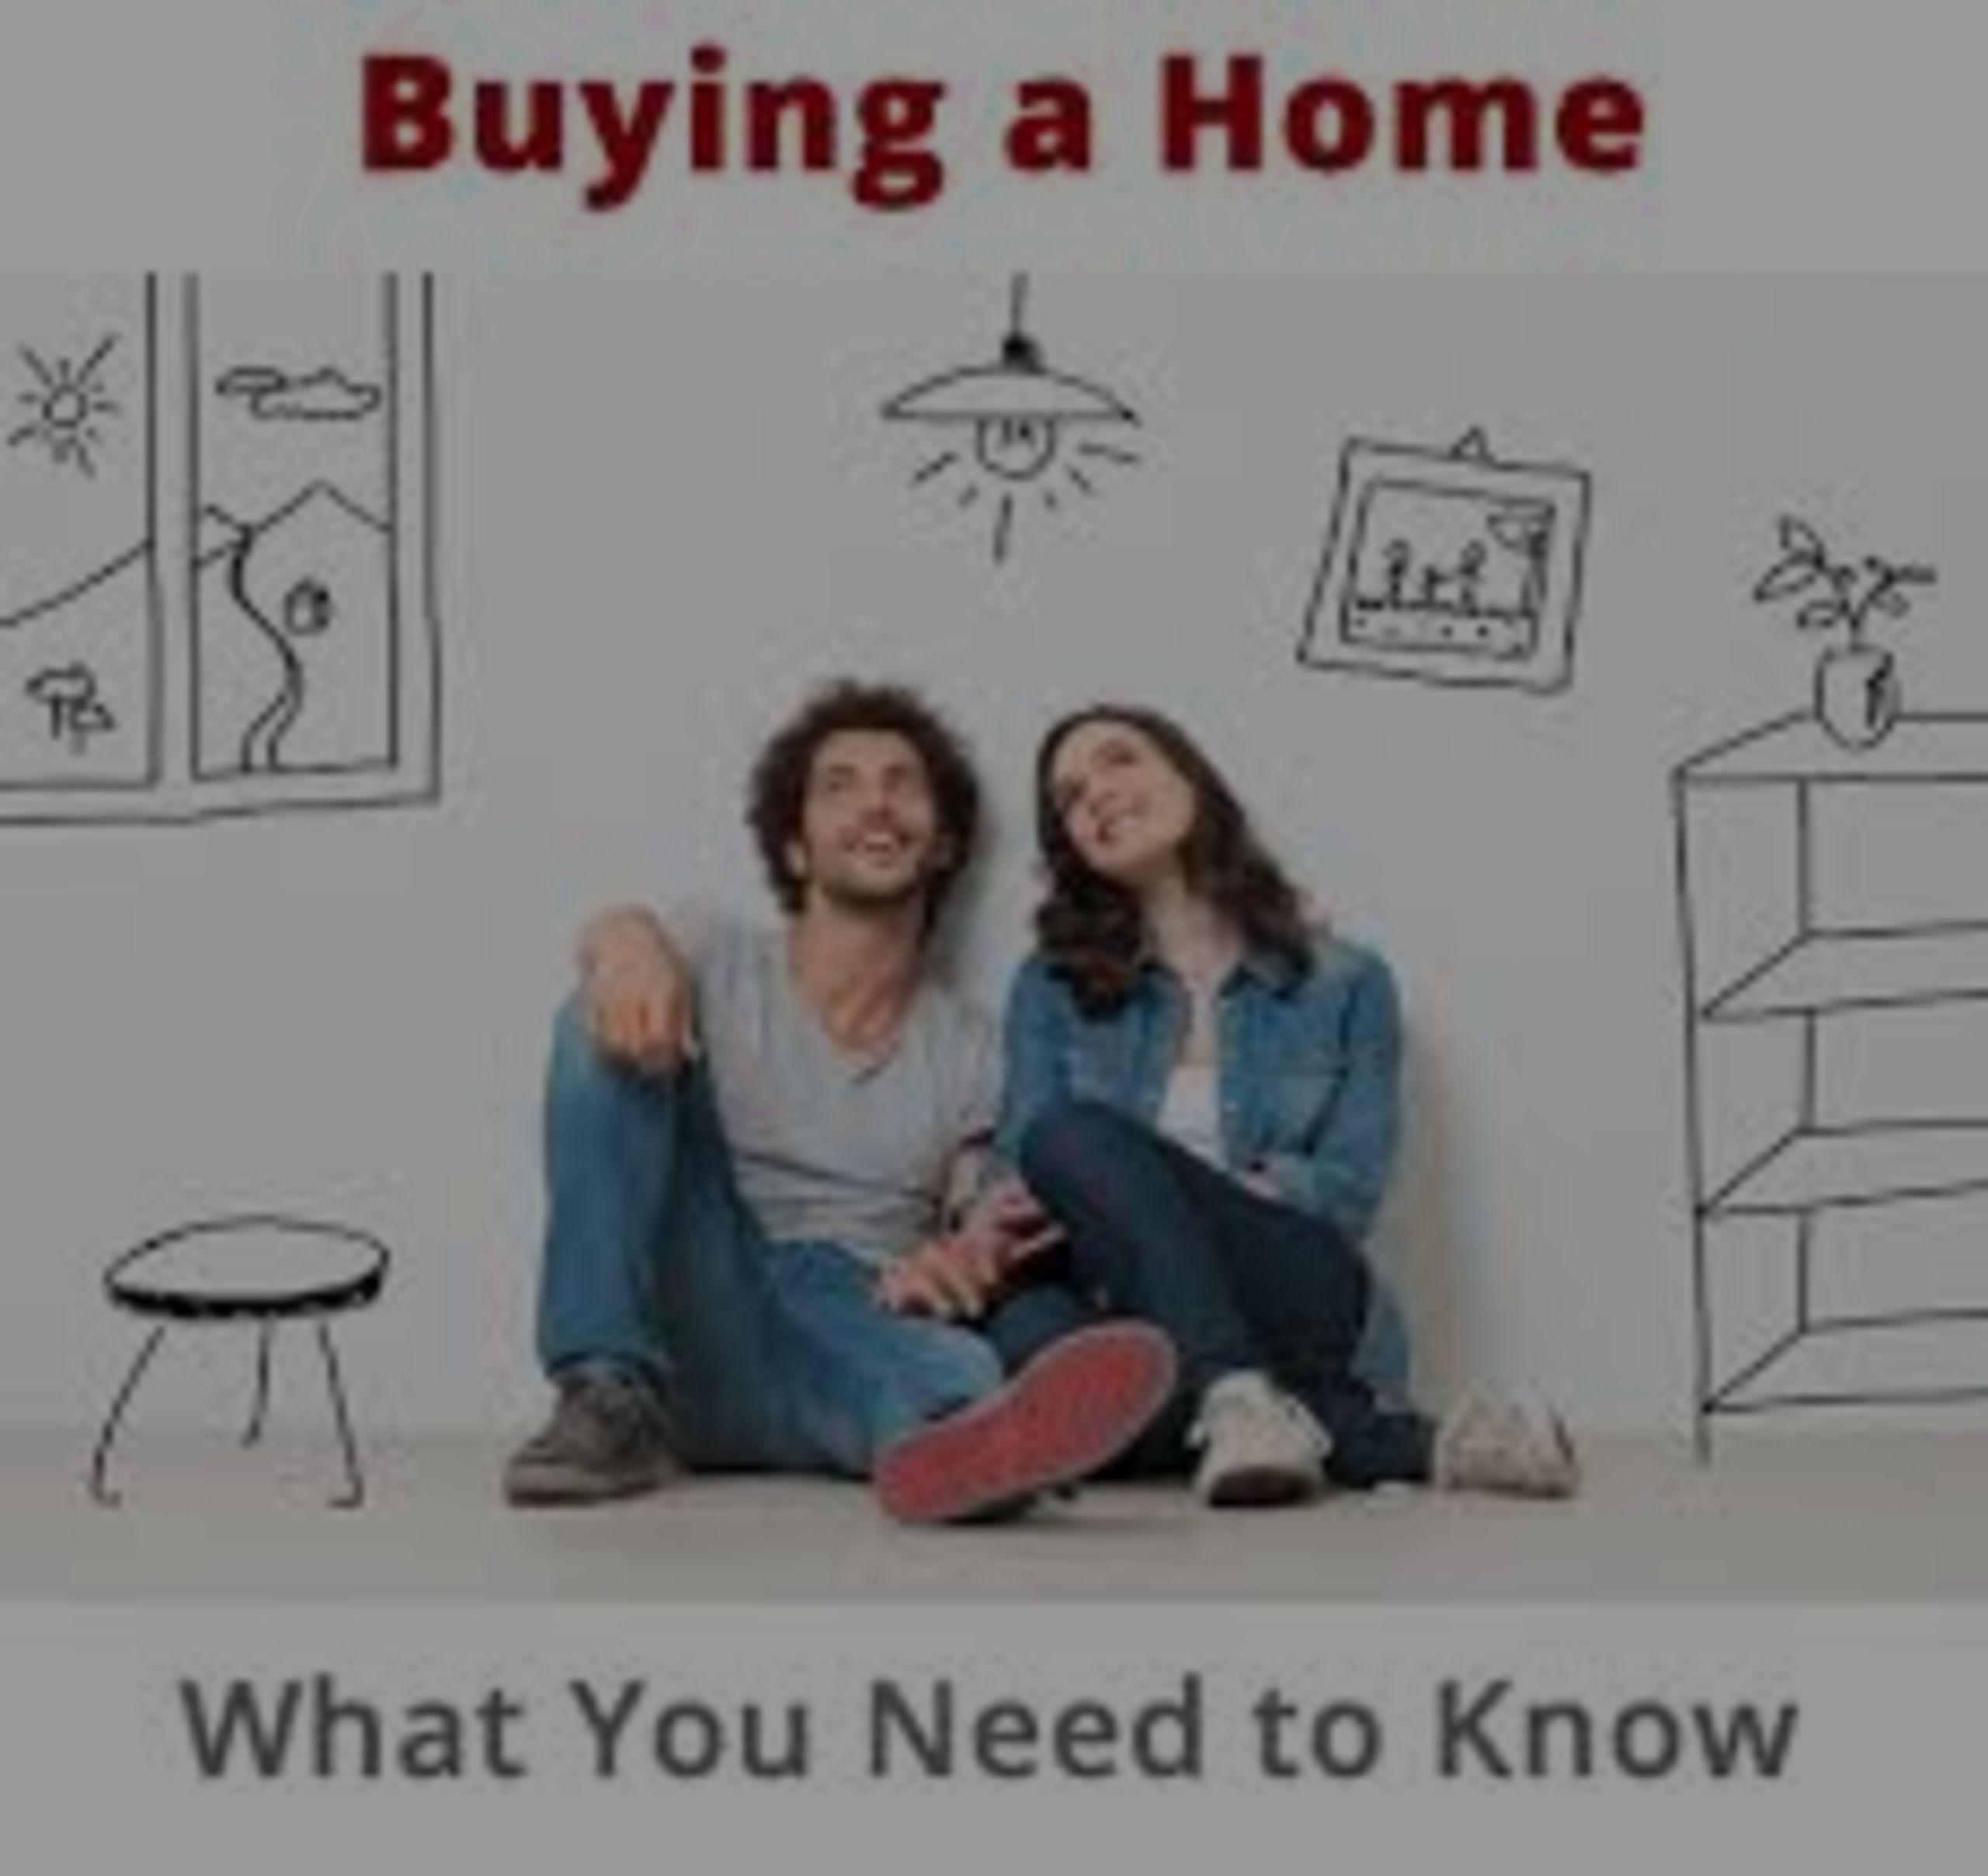 4 QUESTIONS TO ASK BEFORE BUYING A HOME